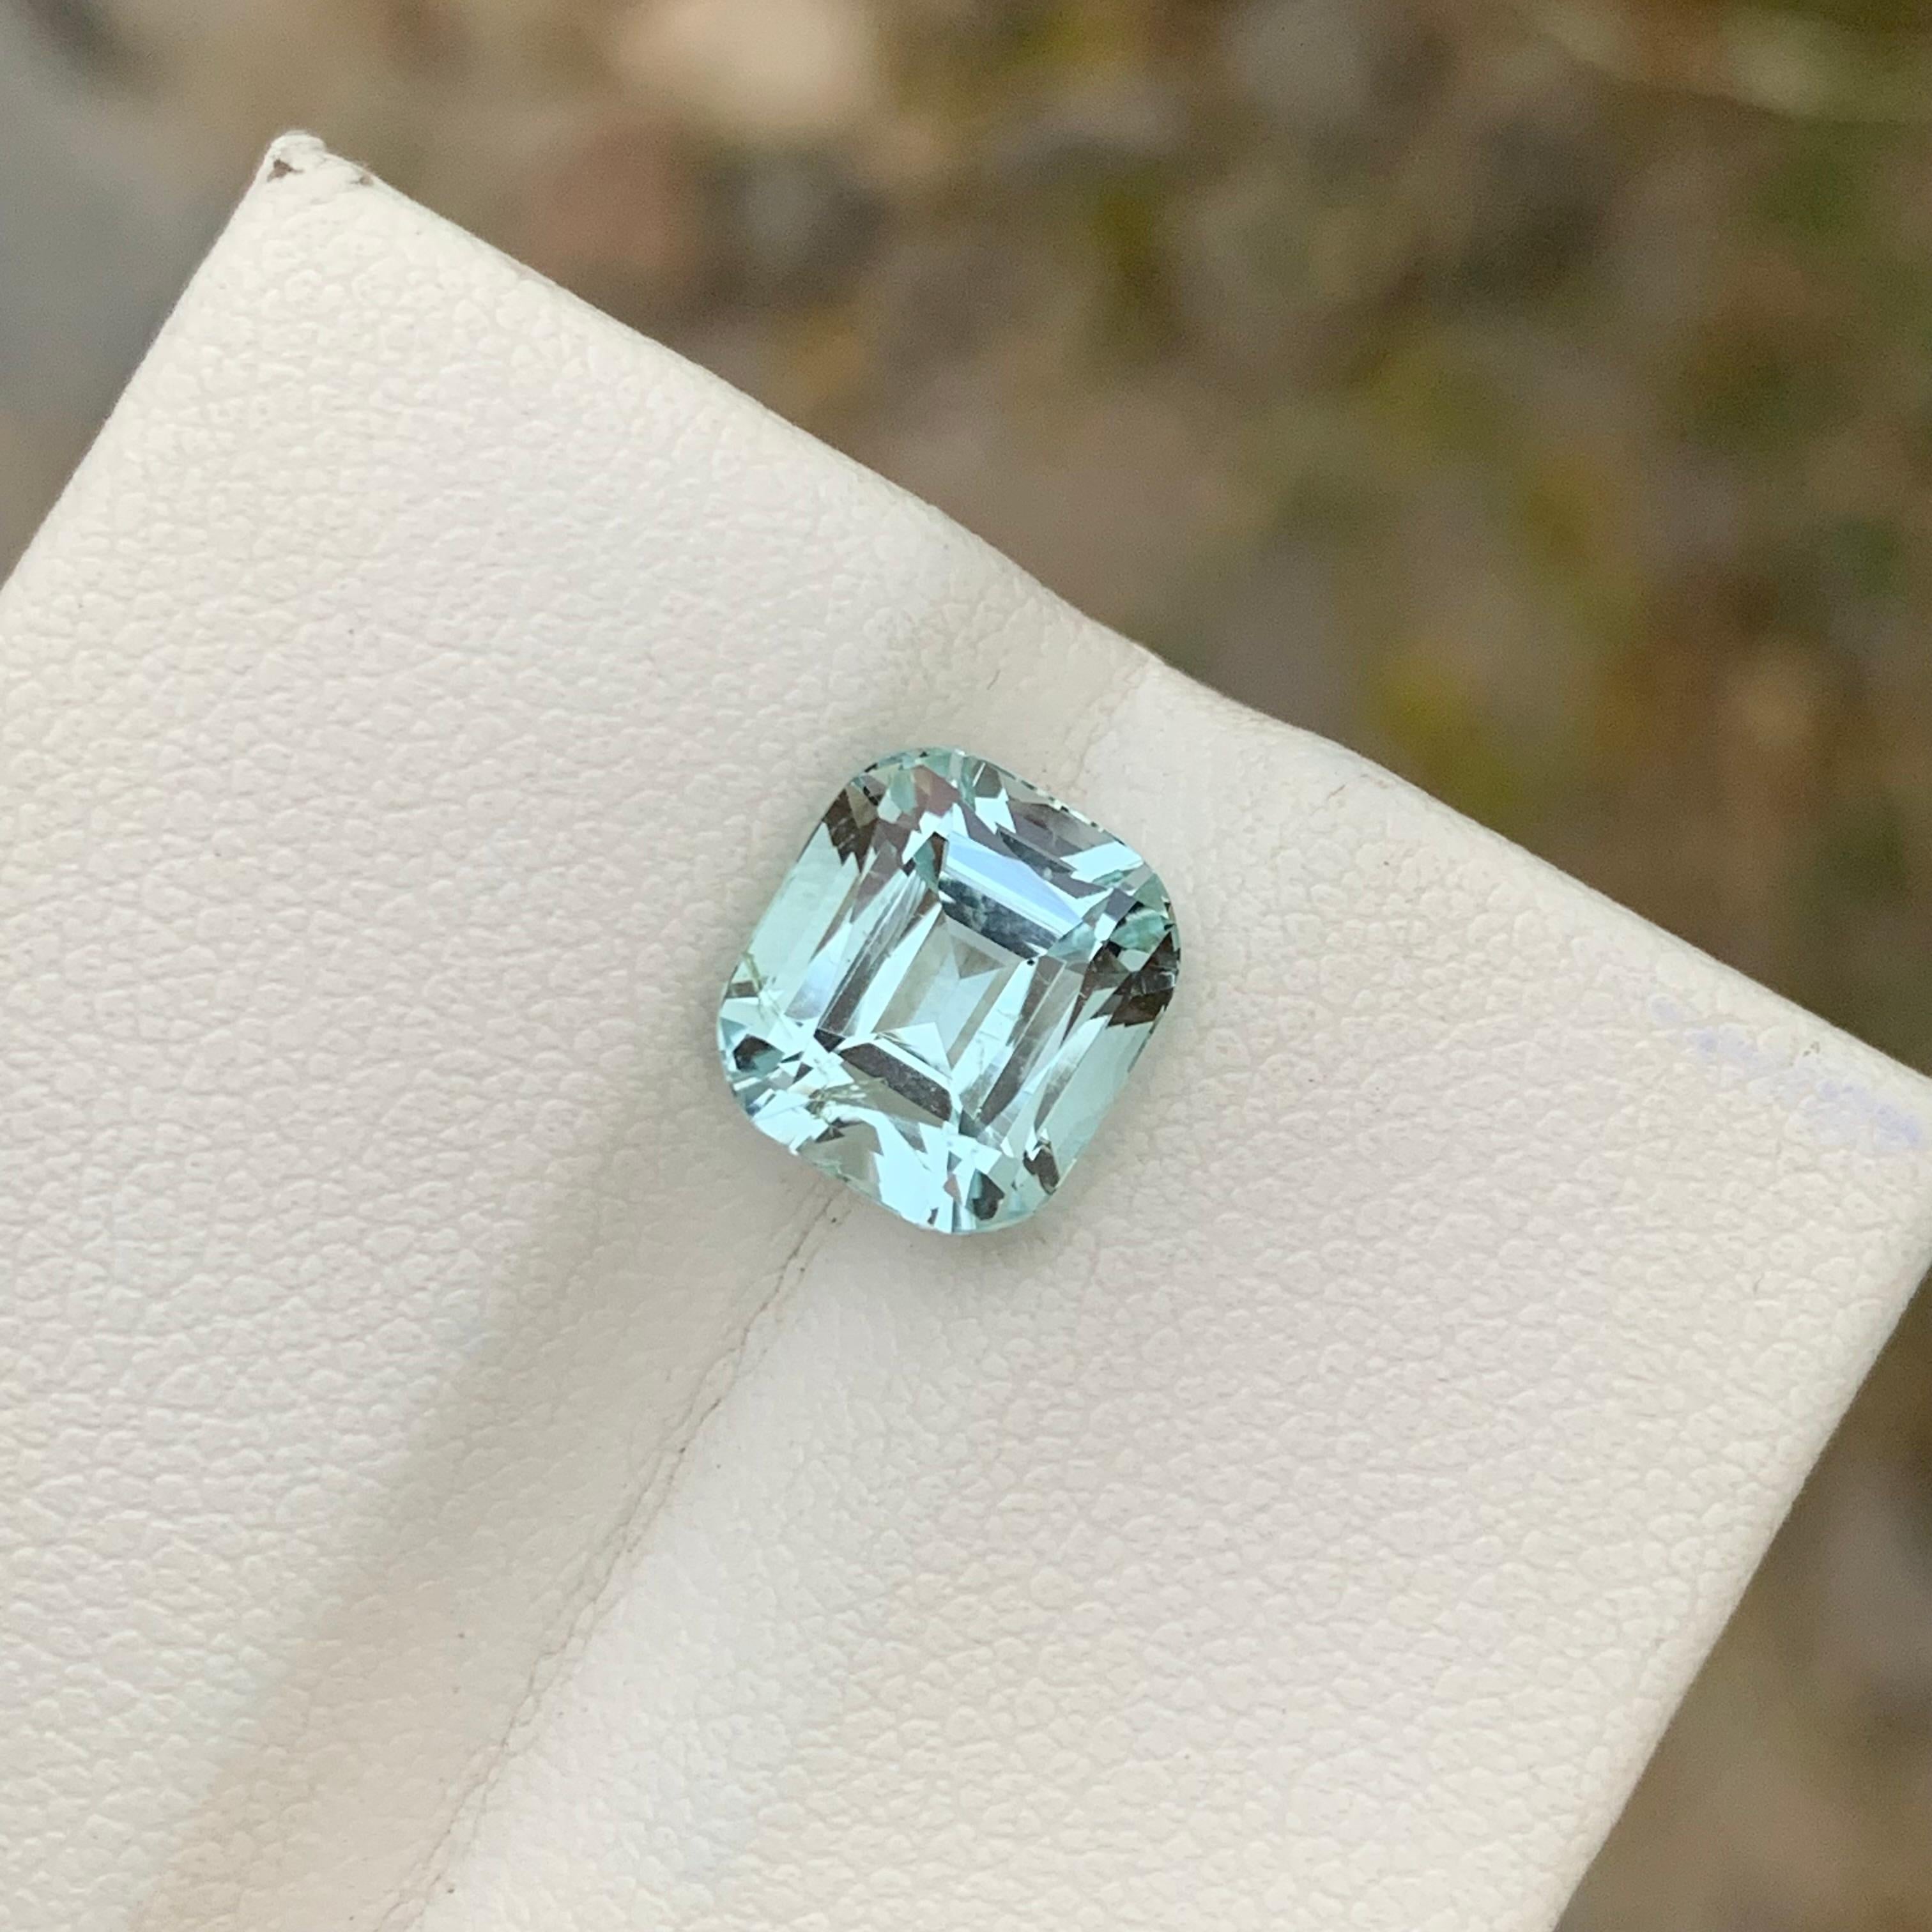 3.55 Carats Natural Loose Aquamarine Ring Gem From Shigar Valley Mine For Sale 4